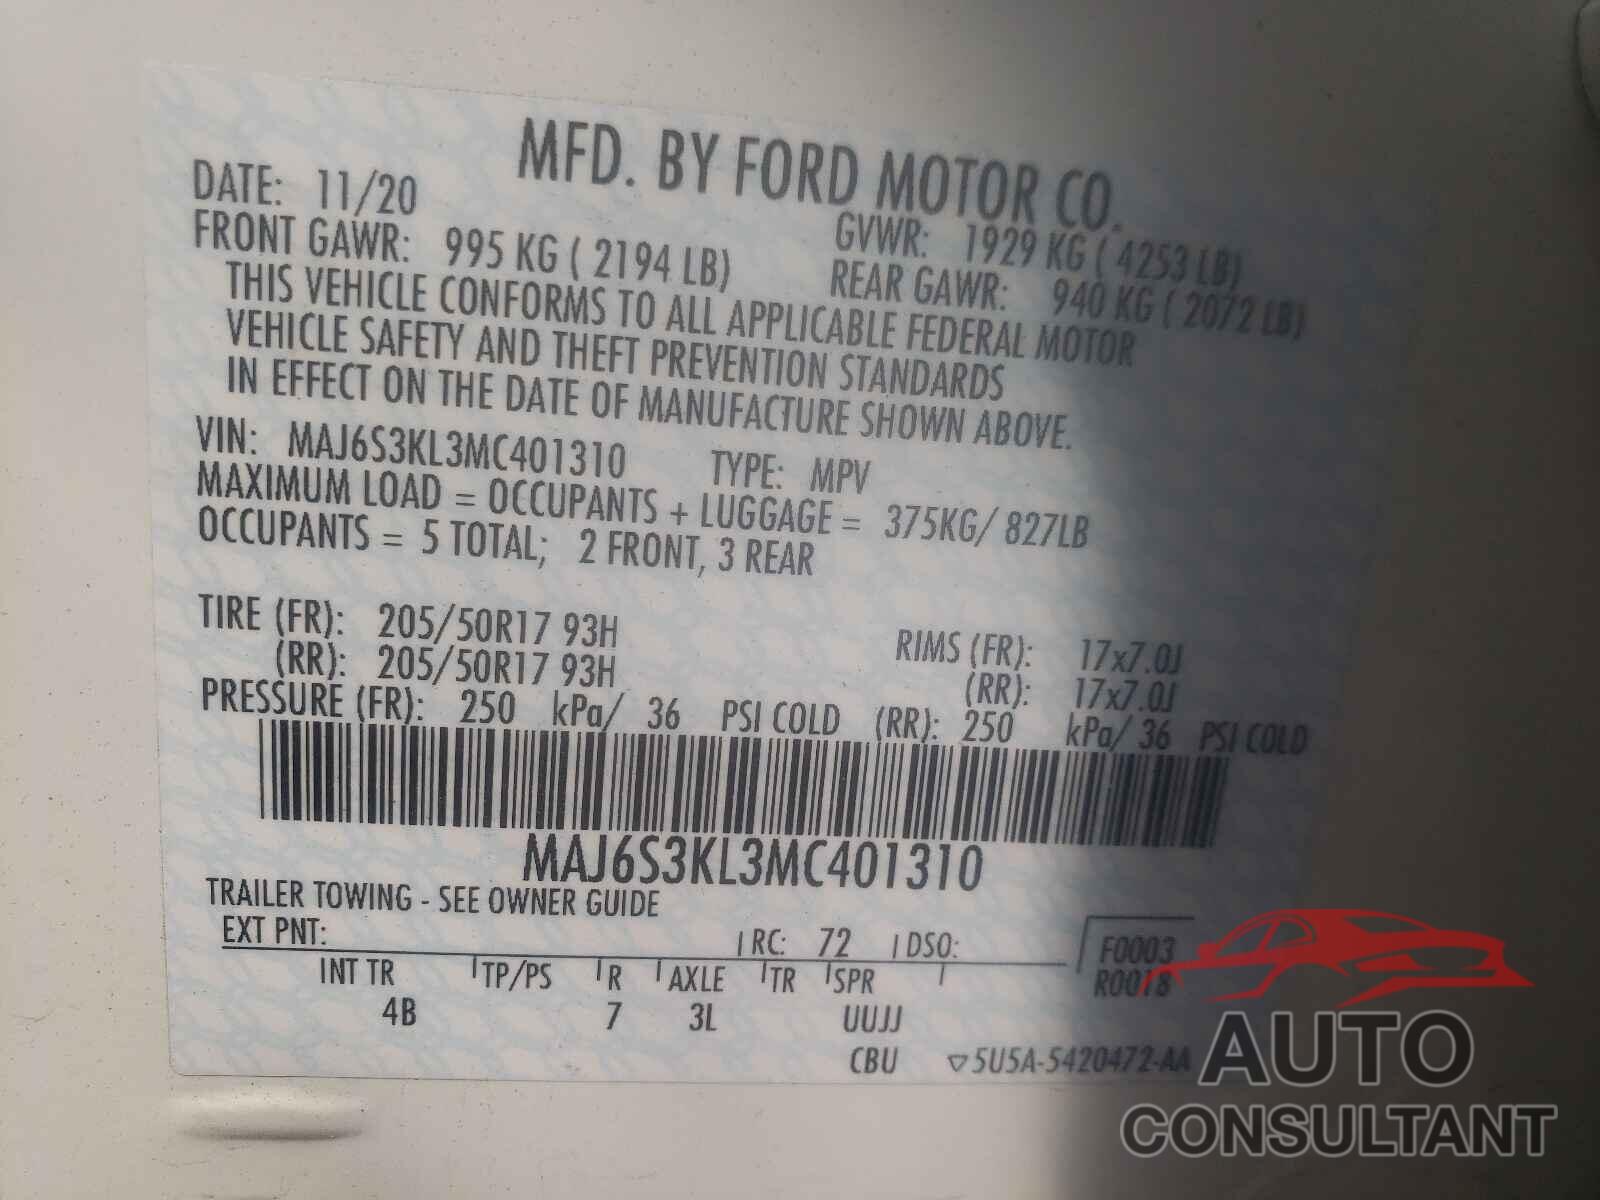 FORD ALL OTHER 2021 - MAJ6S3KL3MC401310